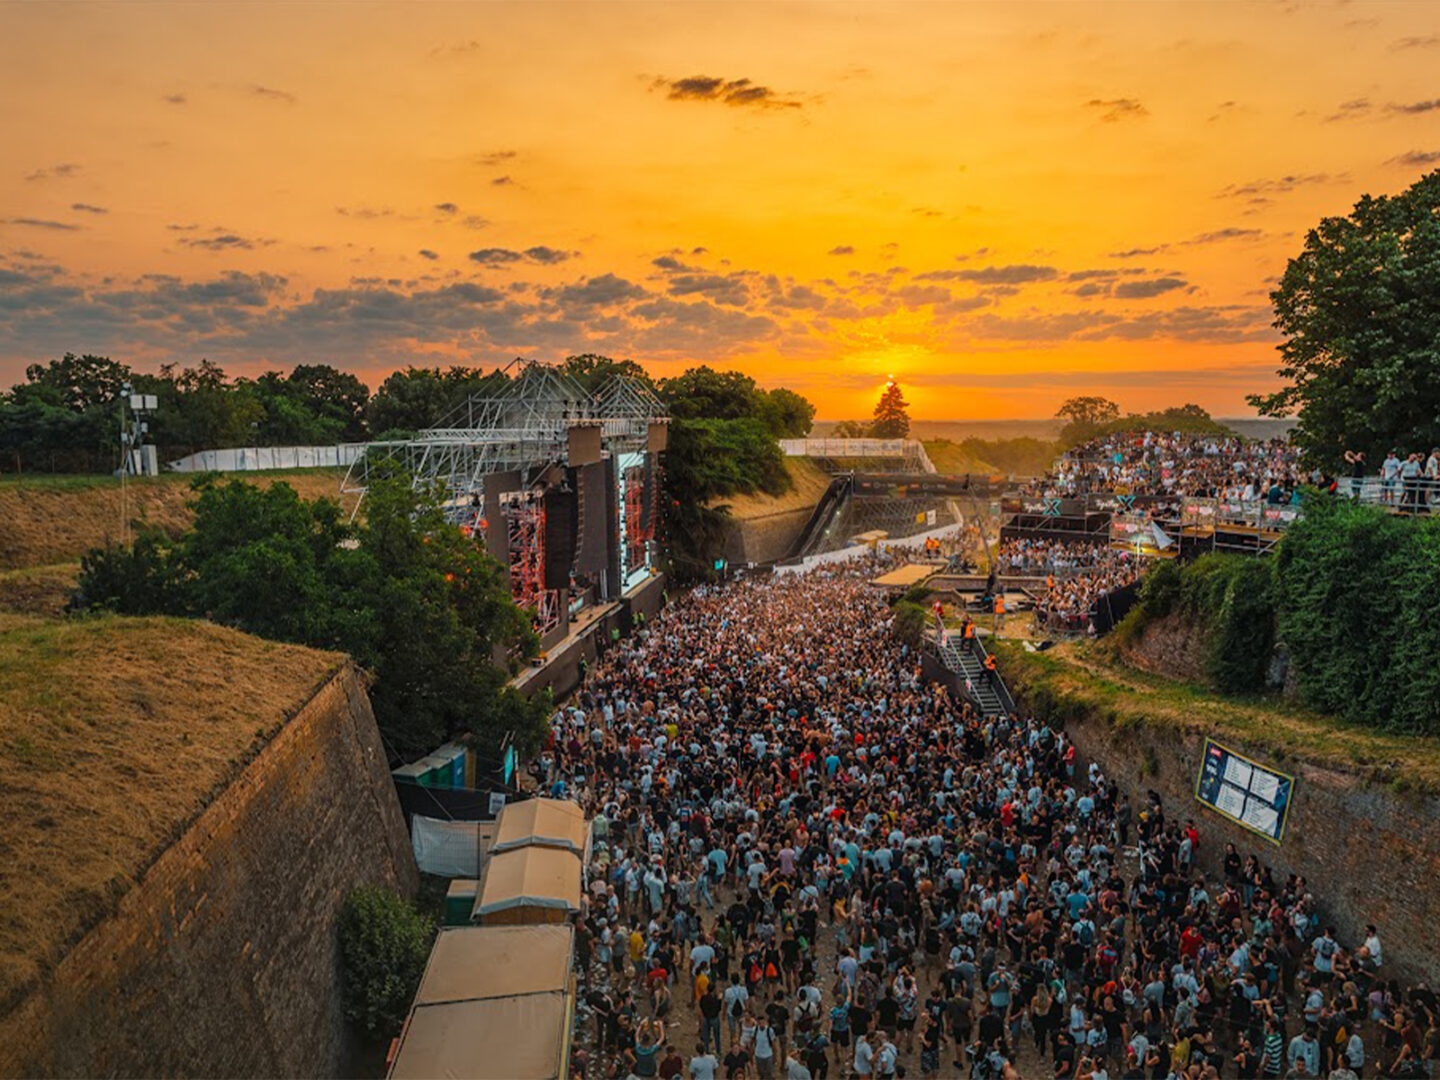 EXIT Festival completes its line-up with Carl Cox, Black Coffee, Bonobo and more than 100 acts